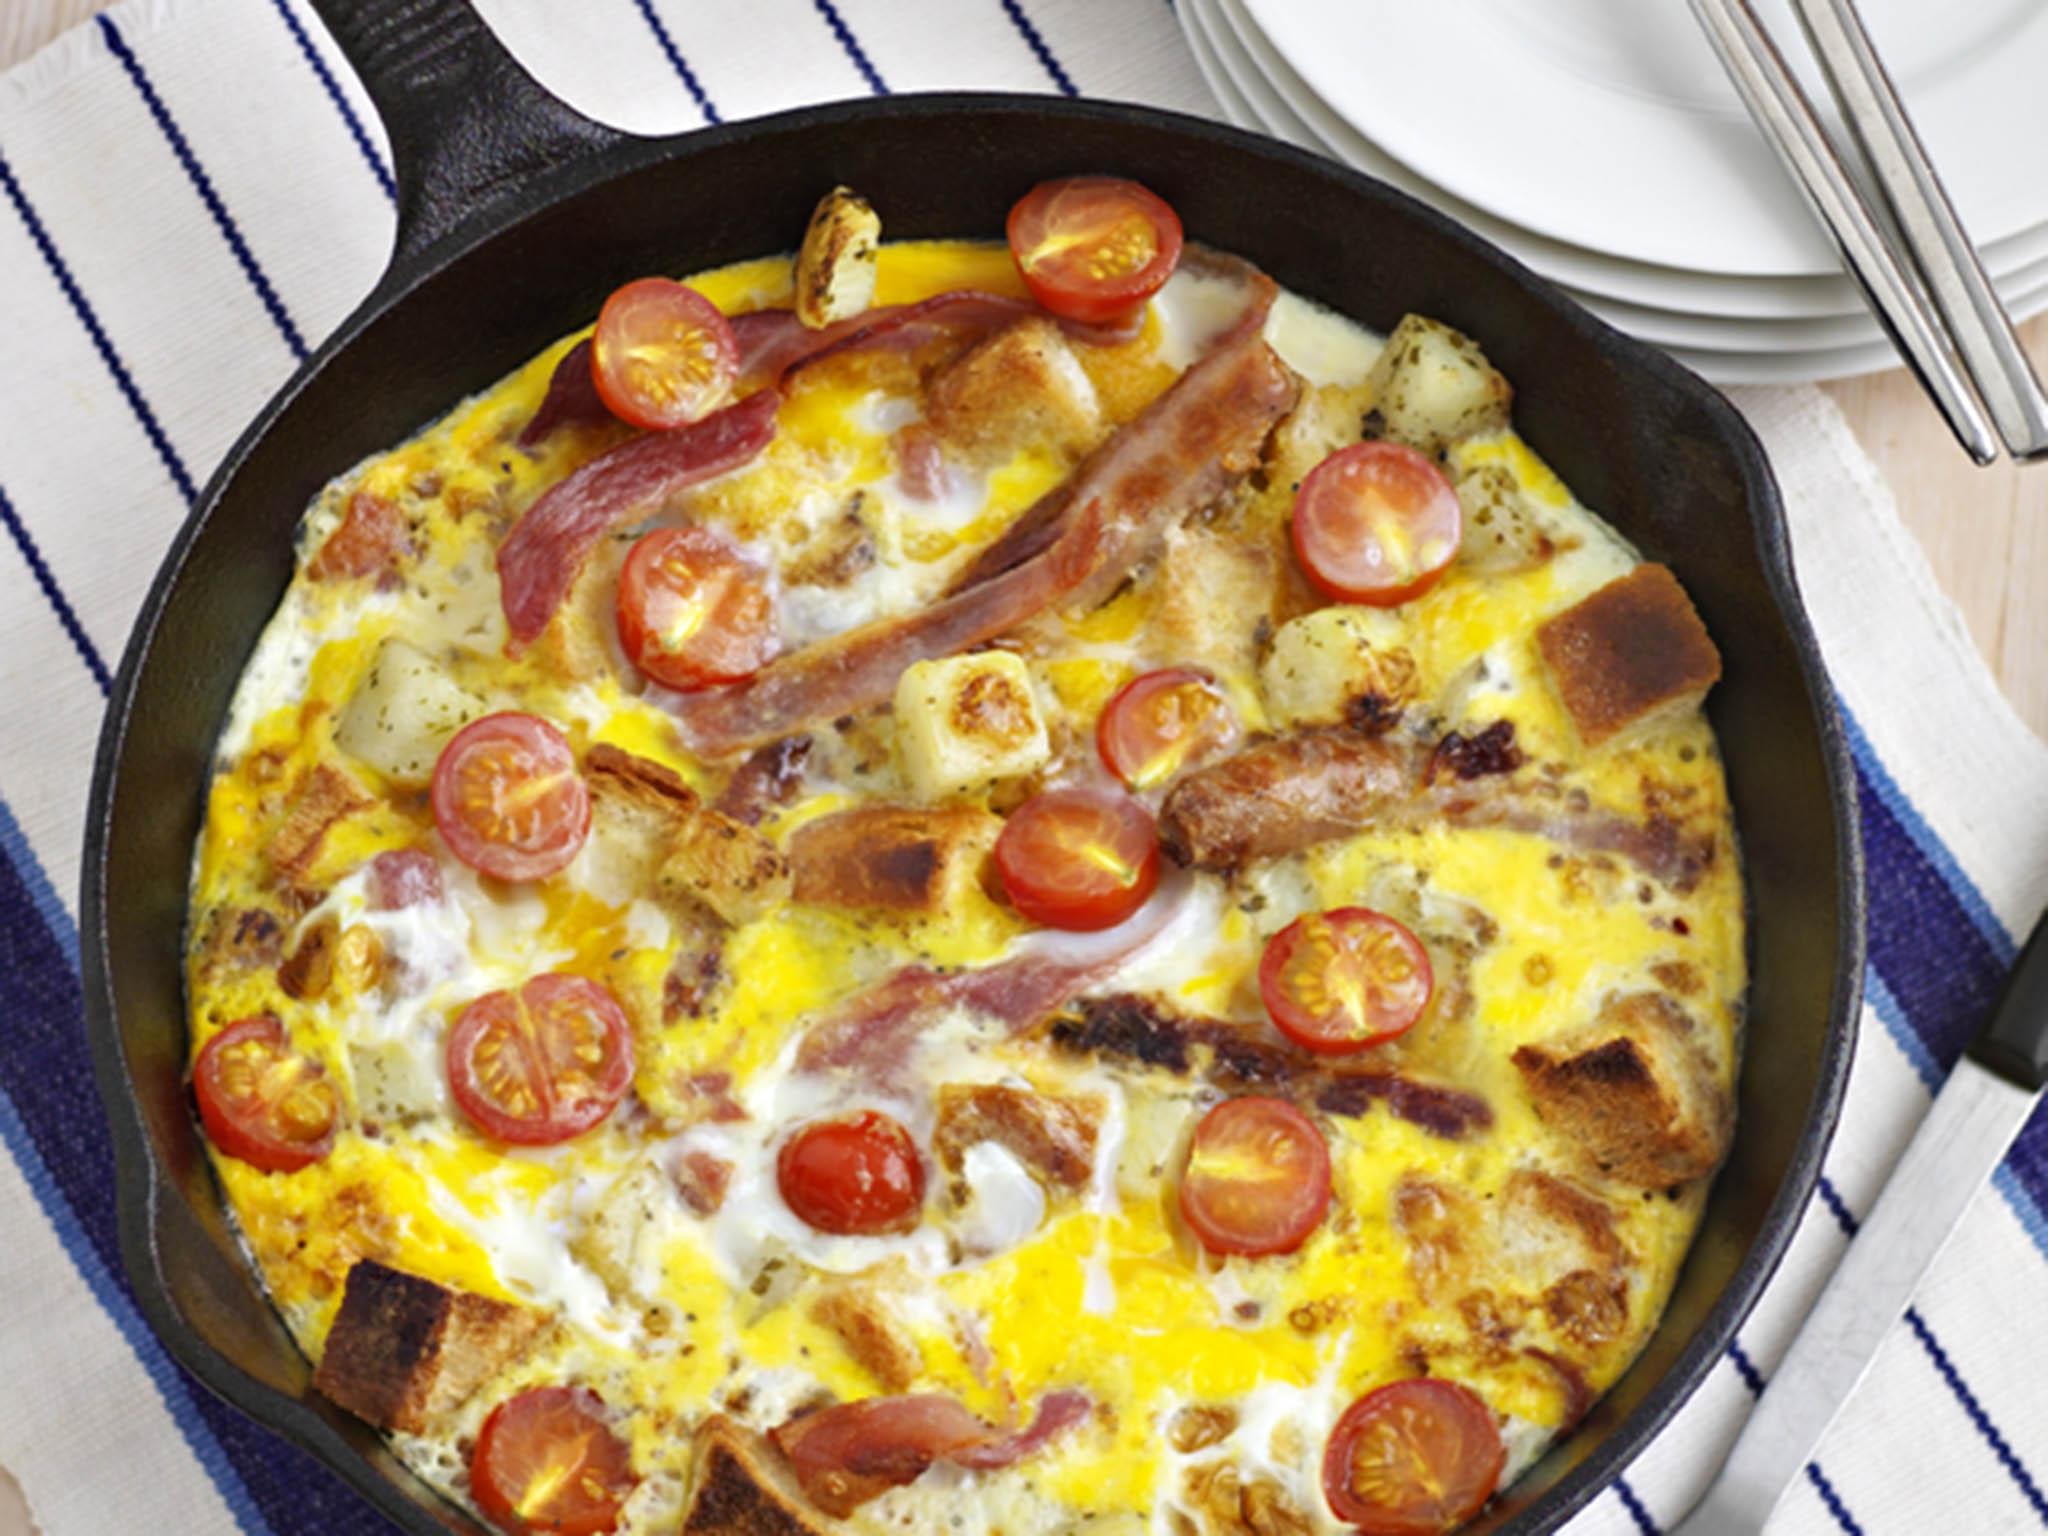 &#13;
Wake up to a hearty sunny breakfast skillet &#13;